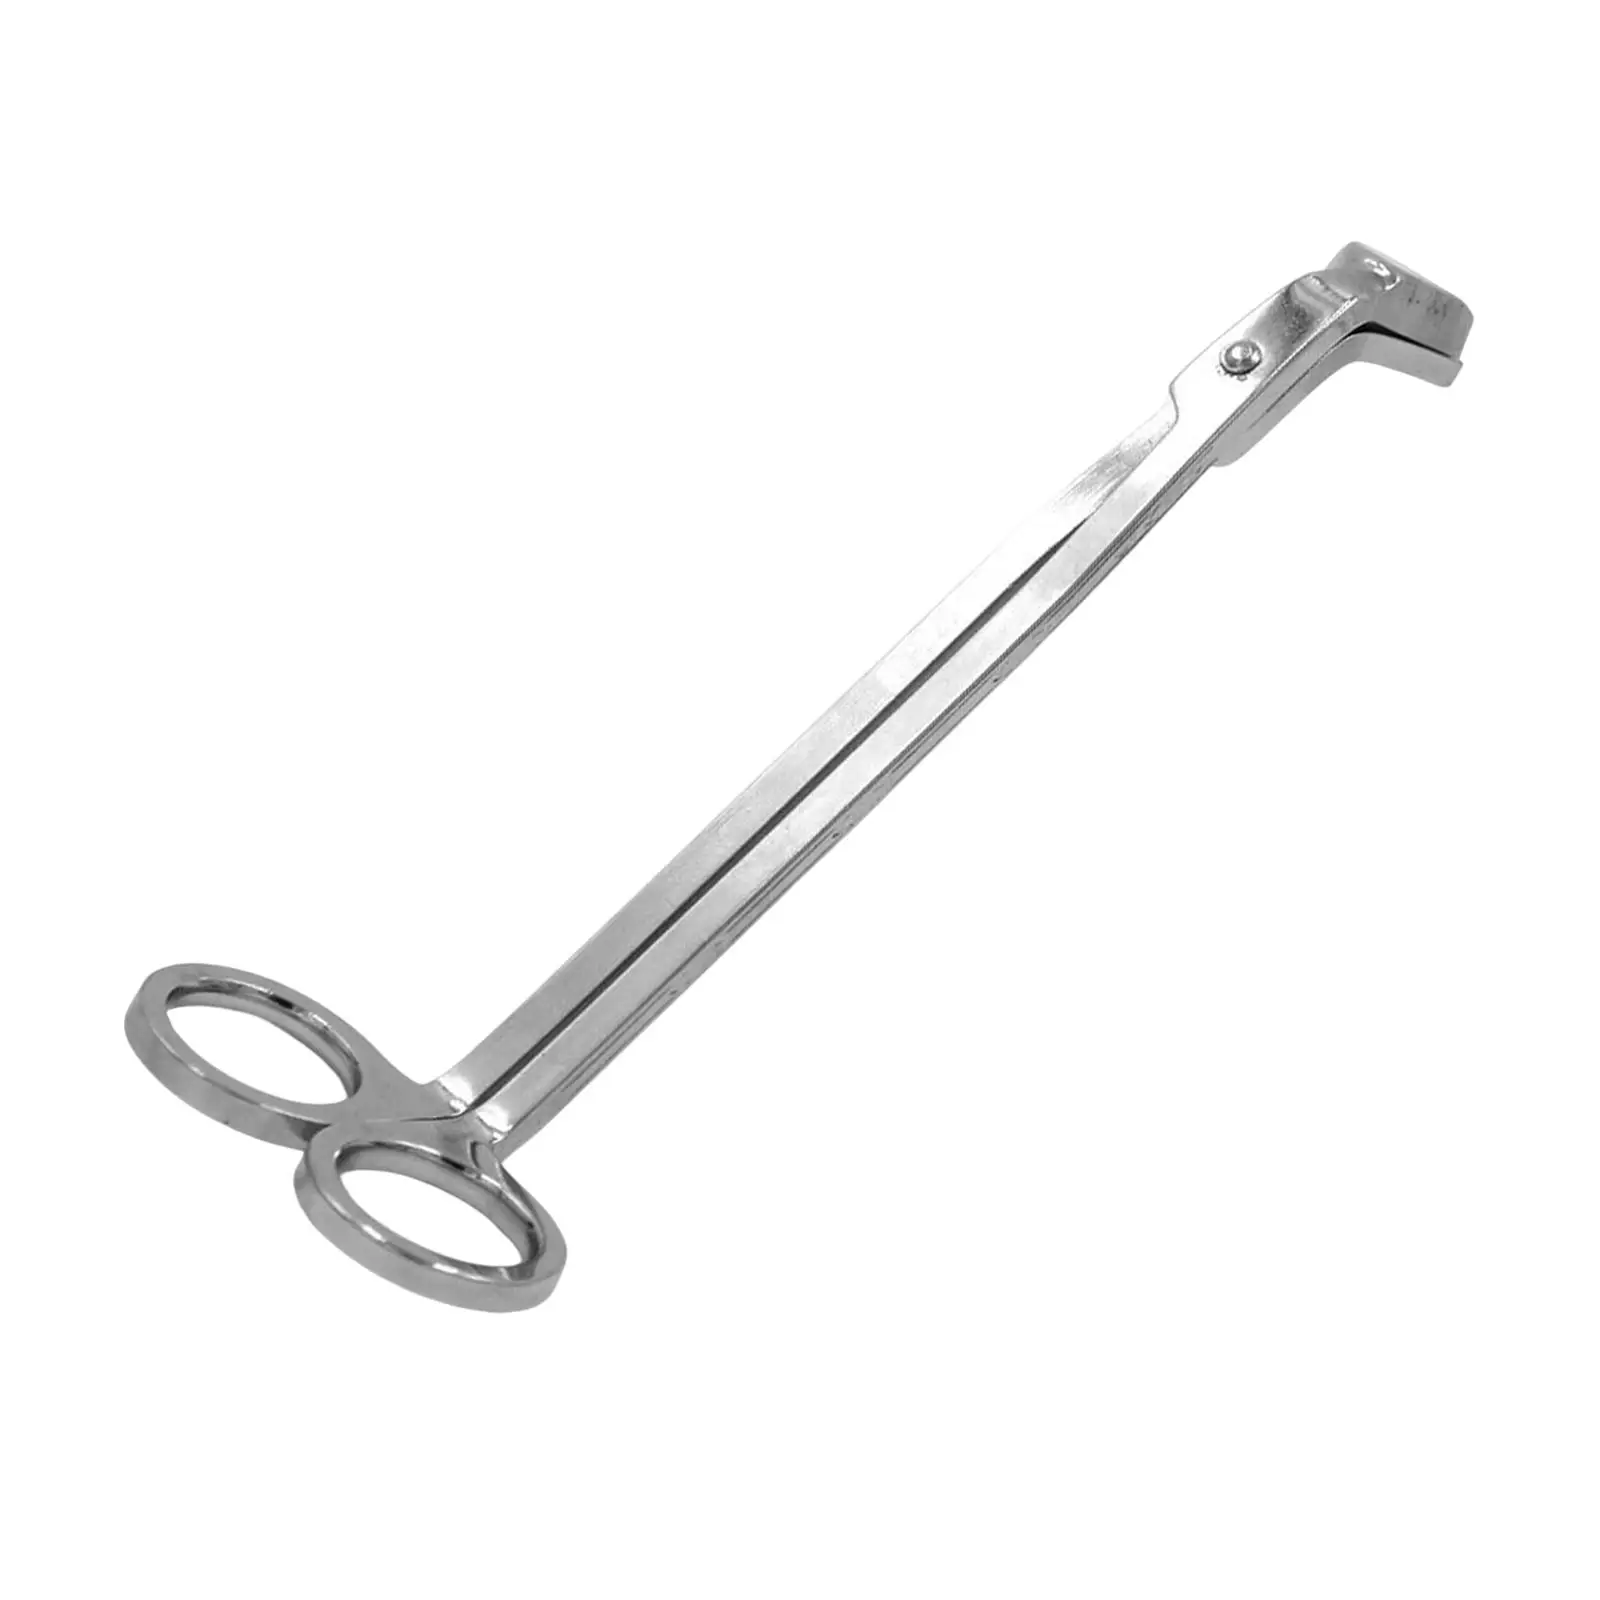 Stainless Steel Wick Clipping Polished Wick Cut Catcher Candles Tool Wick Remove Candles Wick Clipping